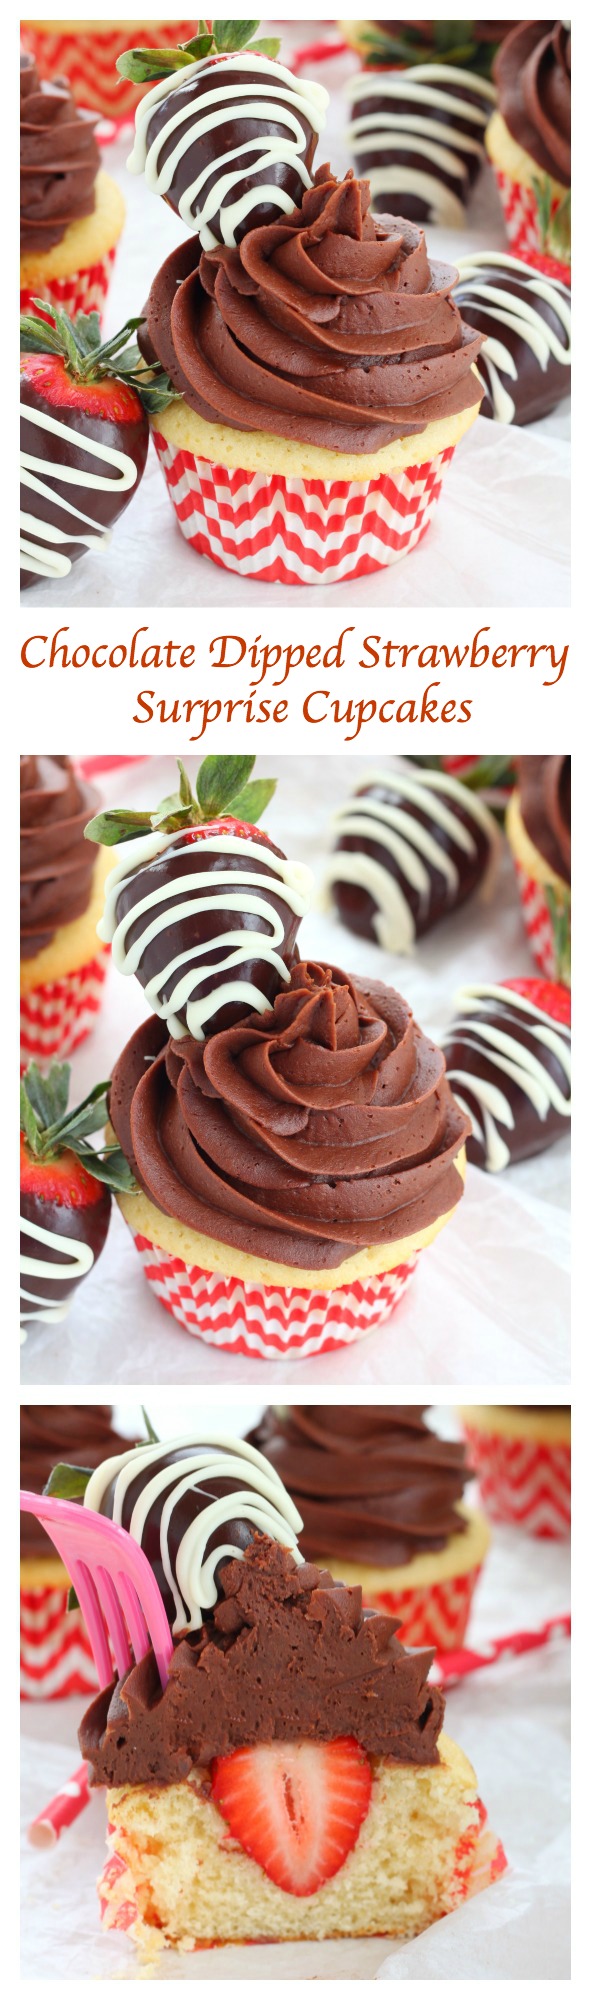 Chocolate and strawberry are a match made in heaven and these delicious, colorful, pretty-looking chocolate dipped strawberry surprise cupcakes are the perfect dessert to satisfy your sweet tooth's cravings! 